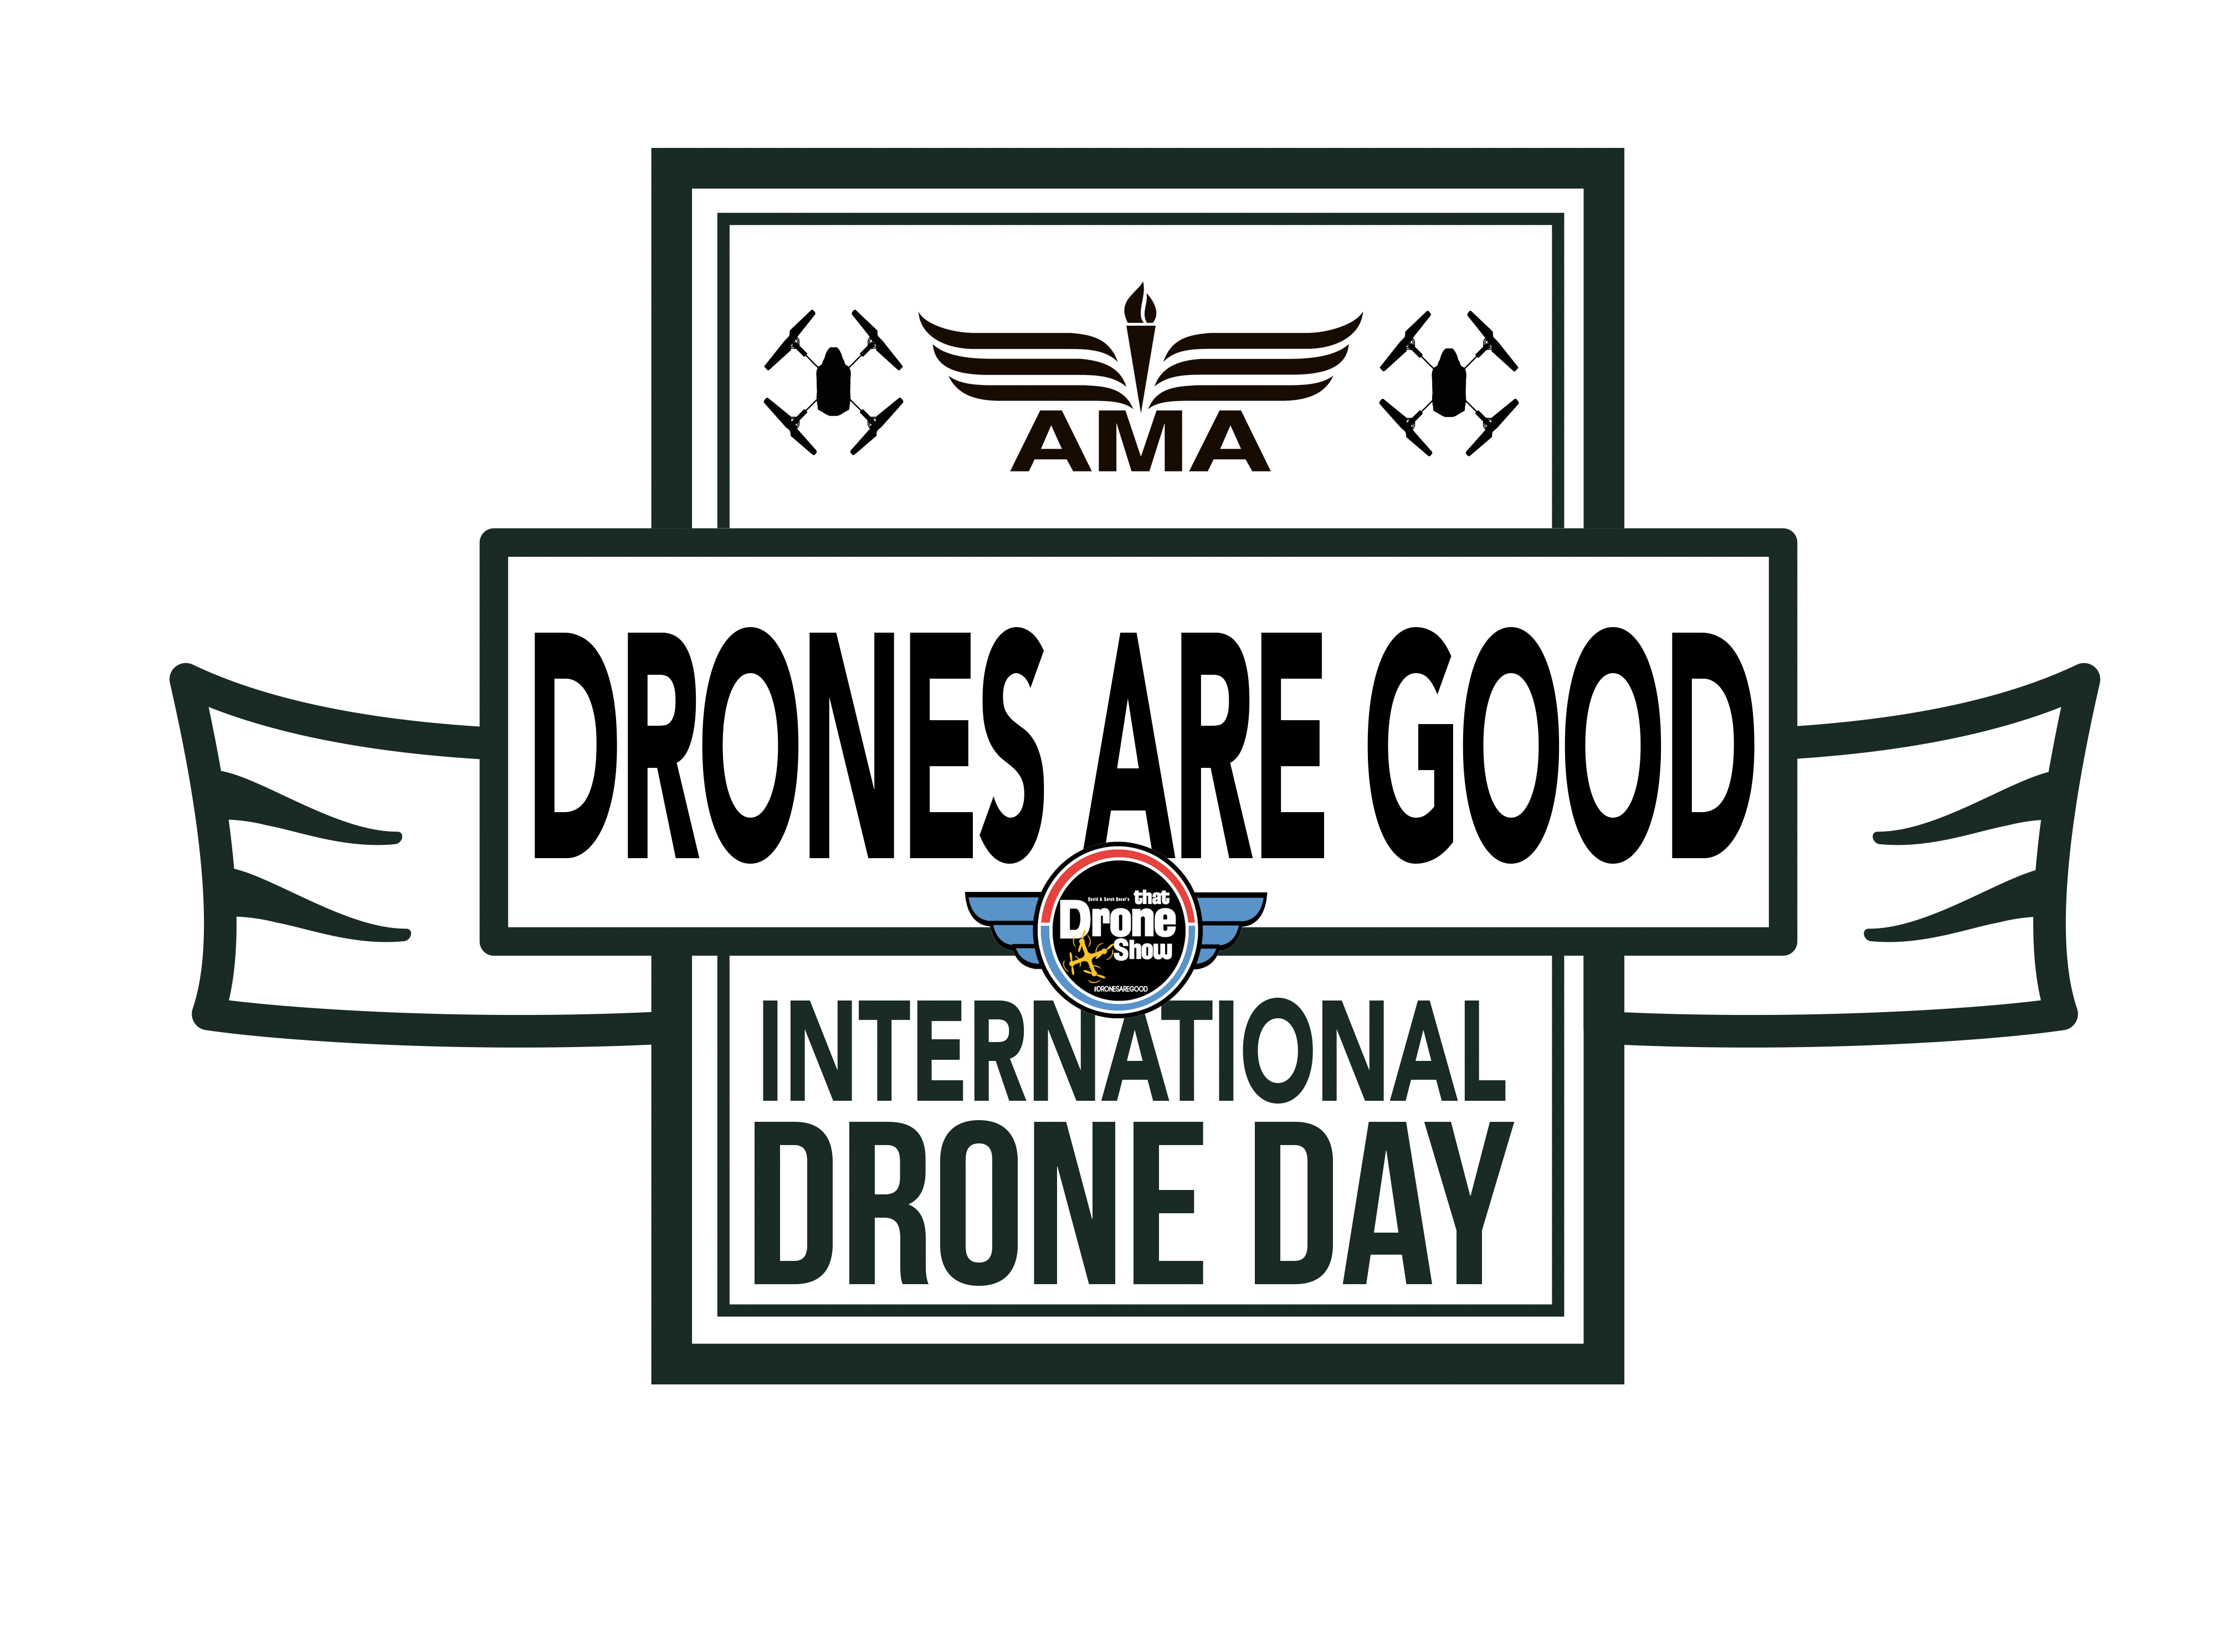 AMA - Drones are Good - International Drone Day logo - International Drone Day (IDD) - a day for those humming flying remote-controlled pilotless aircrafts that can do many things such as photography, videography, deliver packages and more. #DroneDay